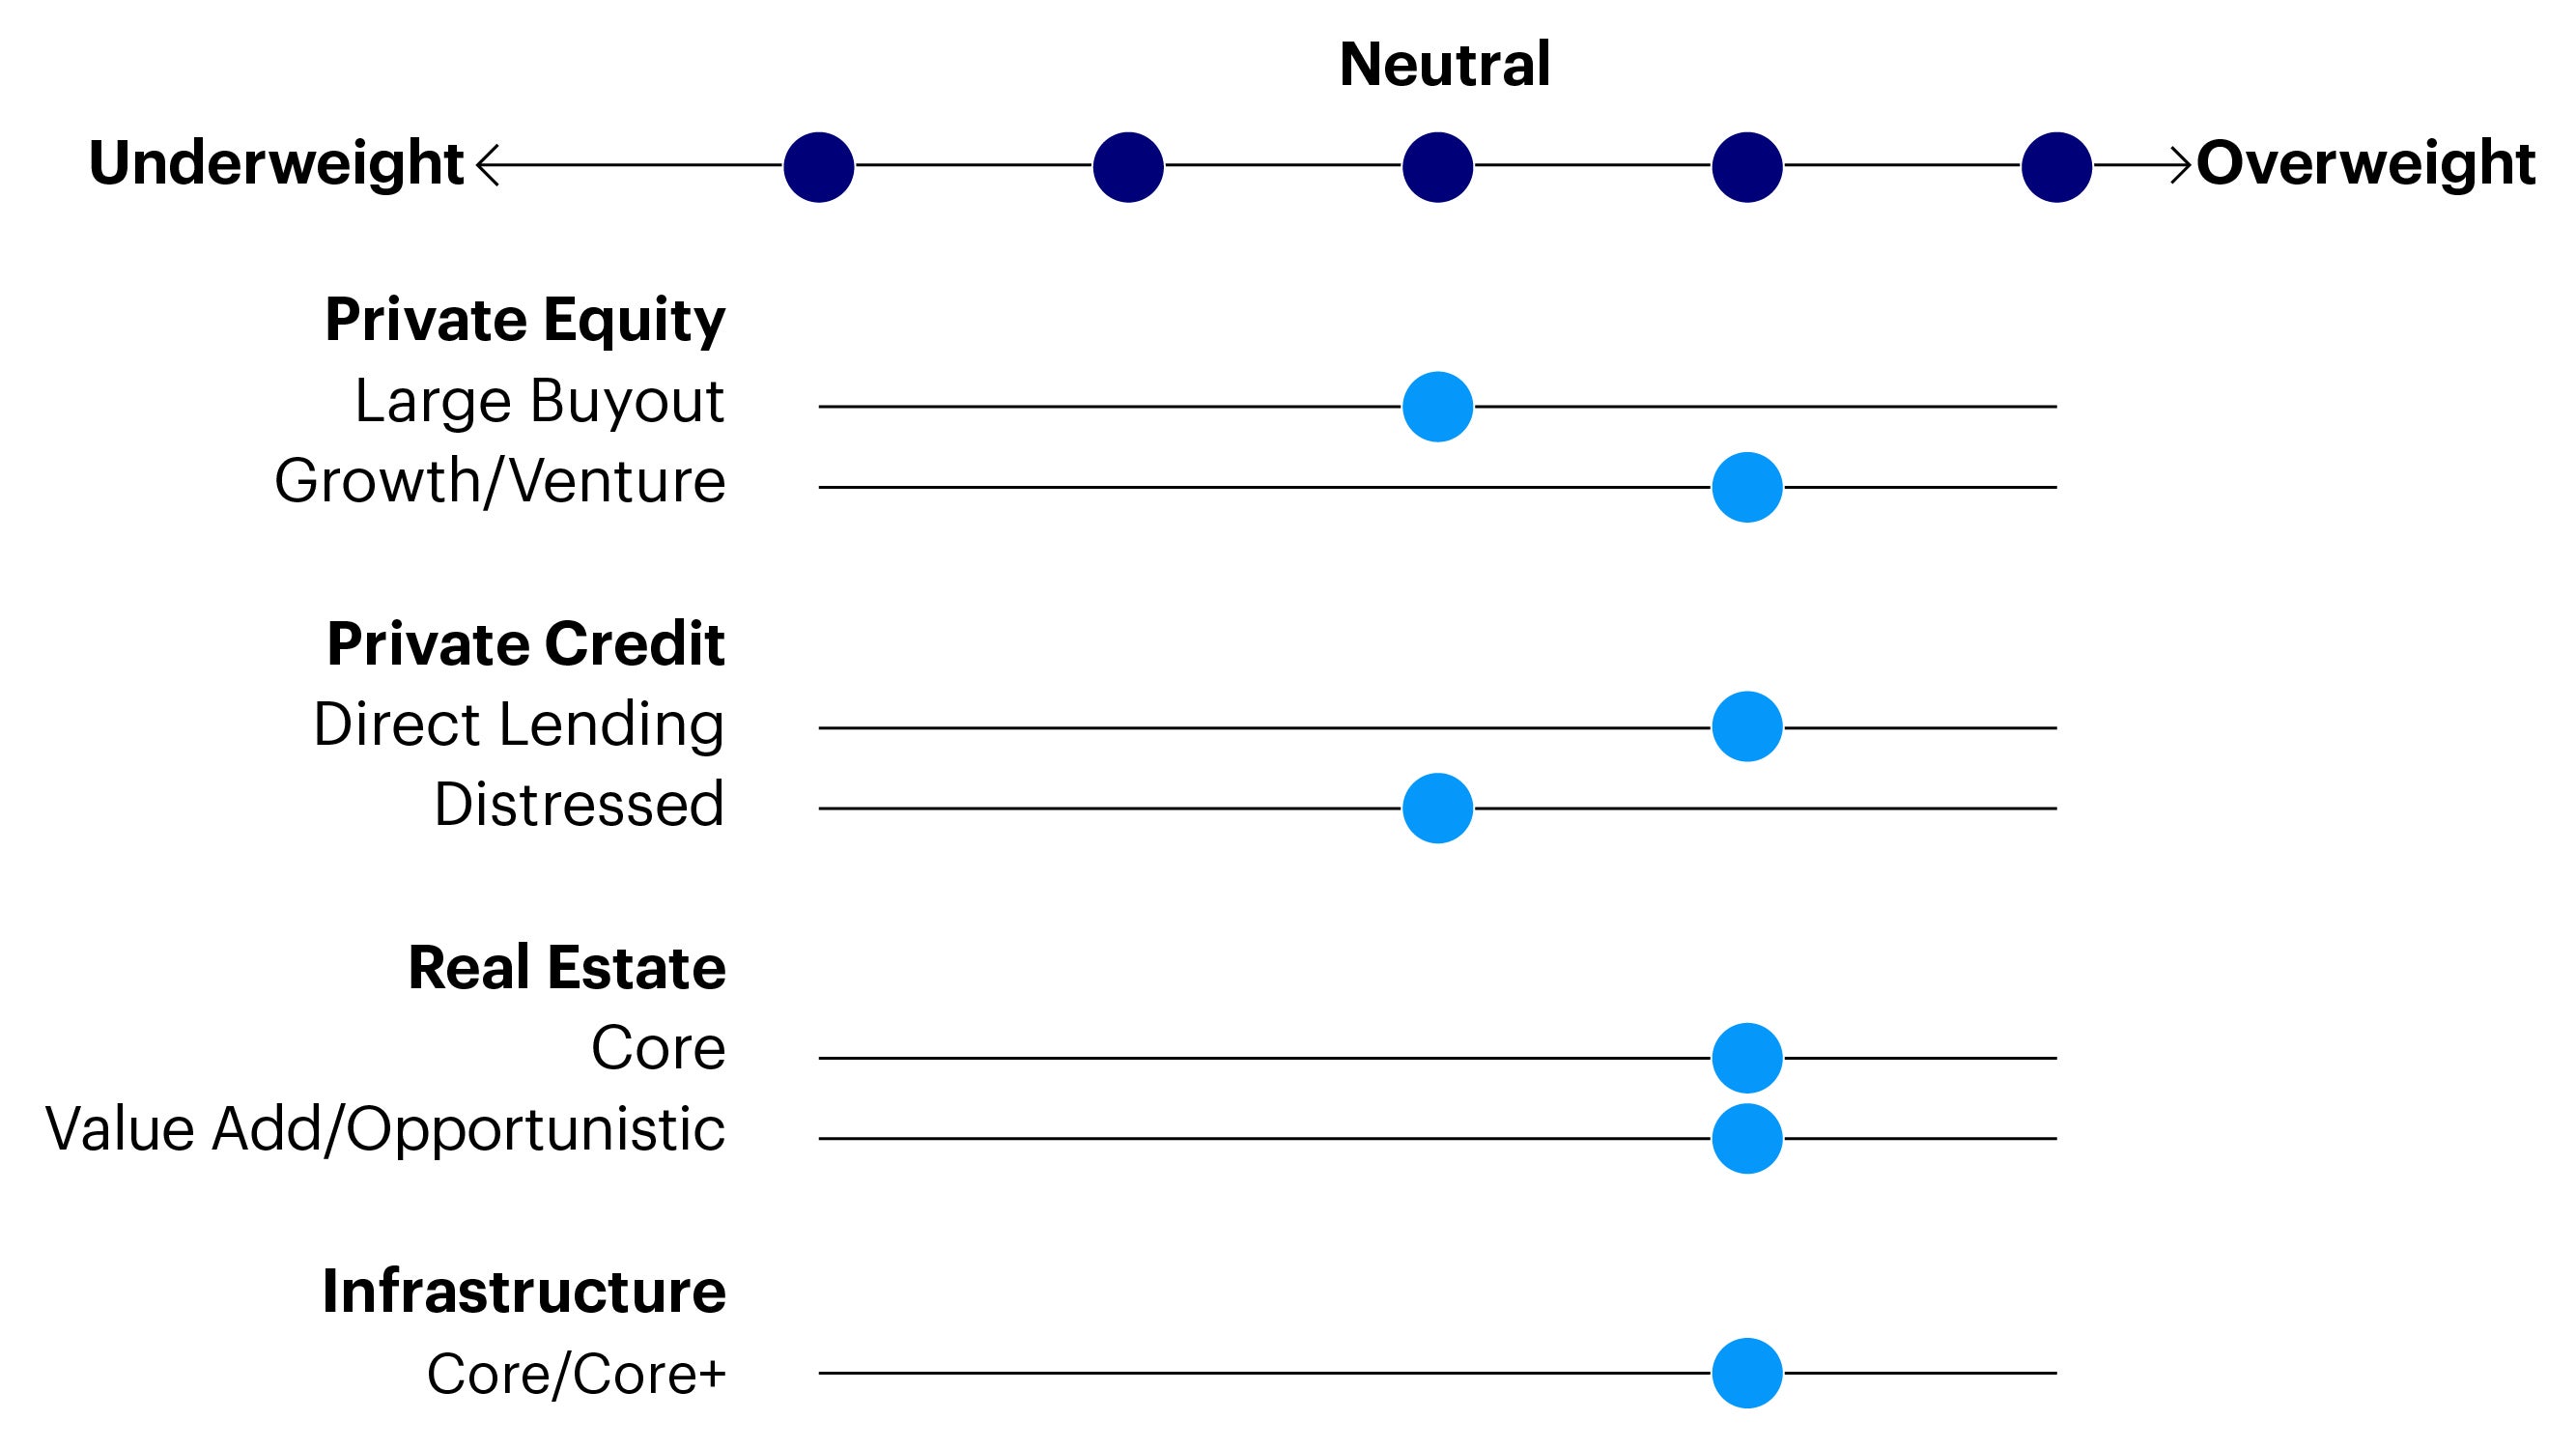 Figure 1. Absolute tactical asset allocation positioning